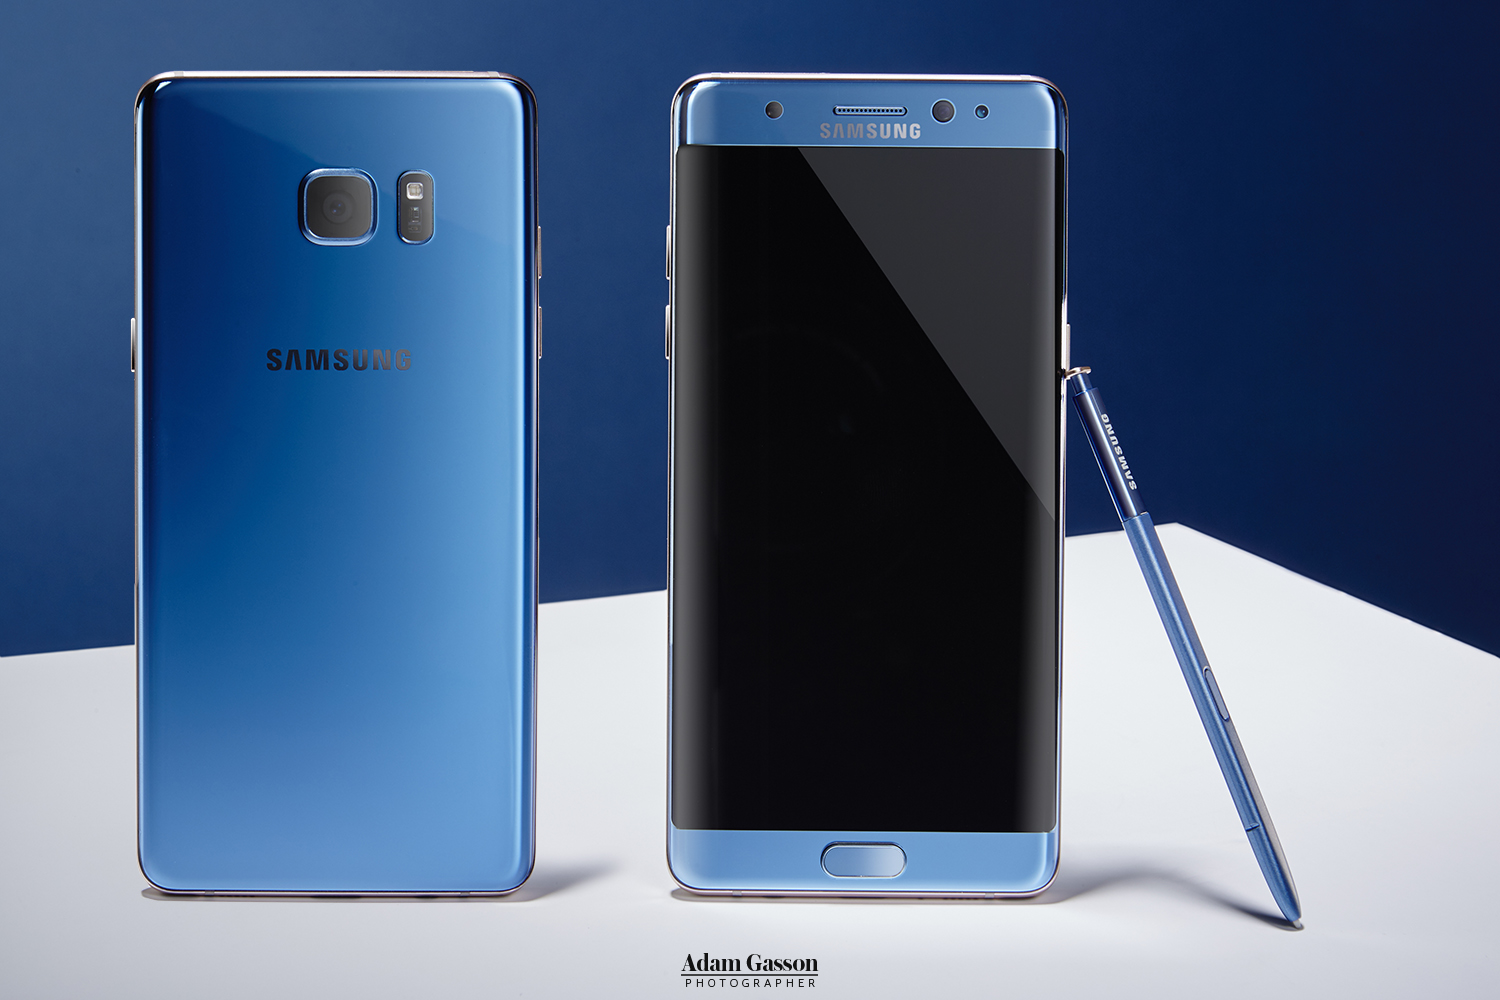 Samsung Galaxy Note 7 photographed for T3. Photo by Adam Gasson.